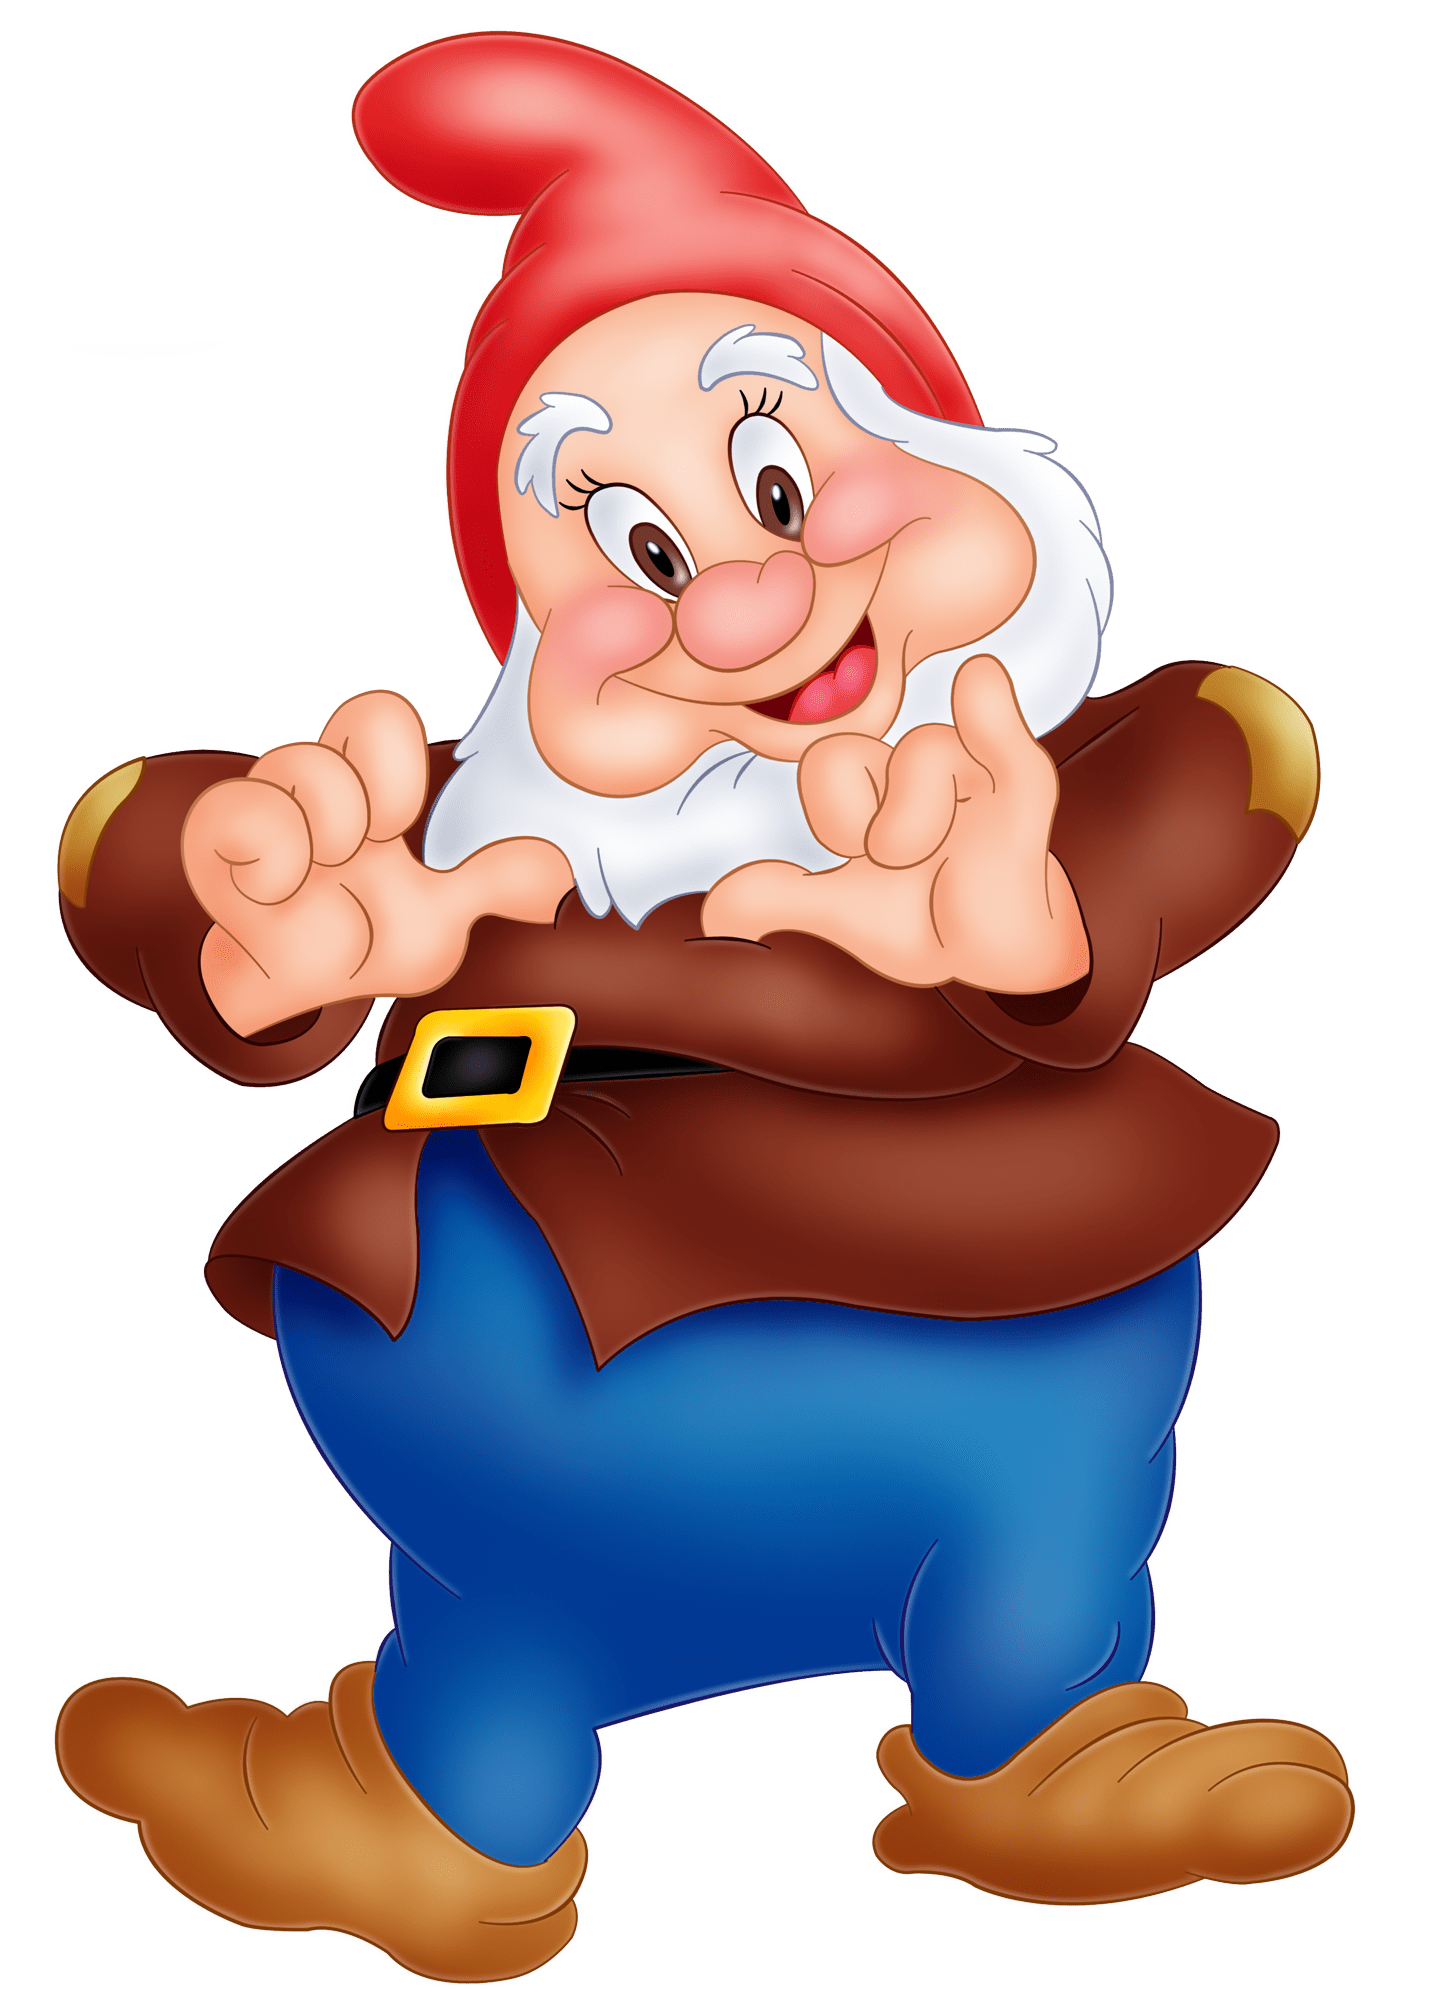 Snow White Happy Dwarf Background Image PNG